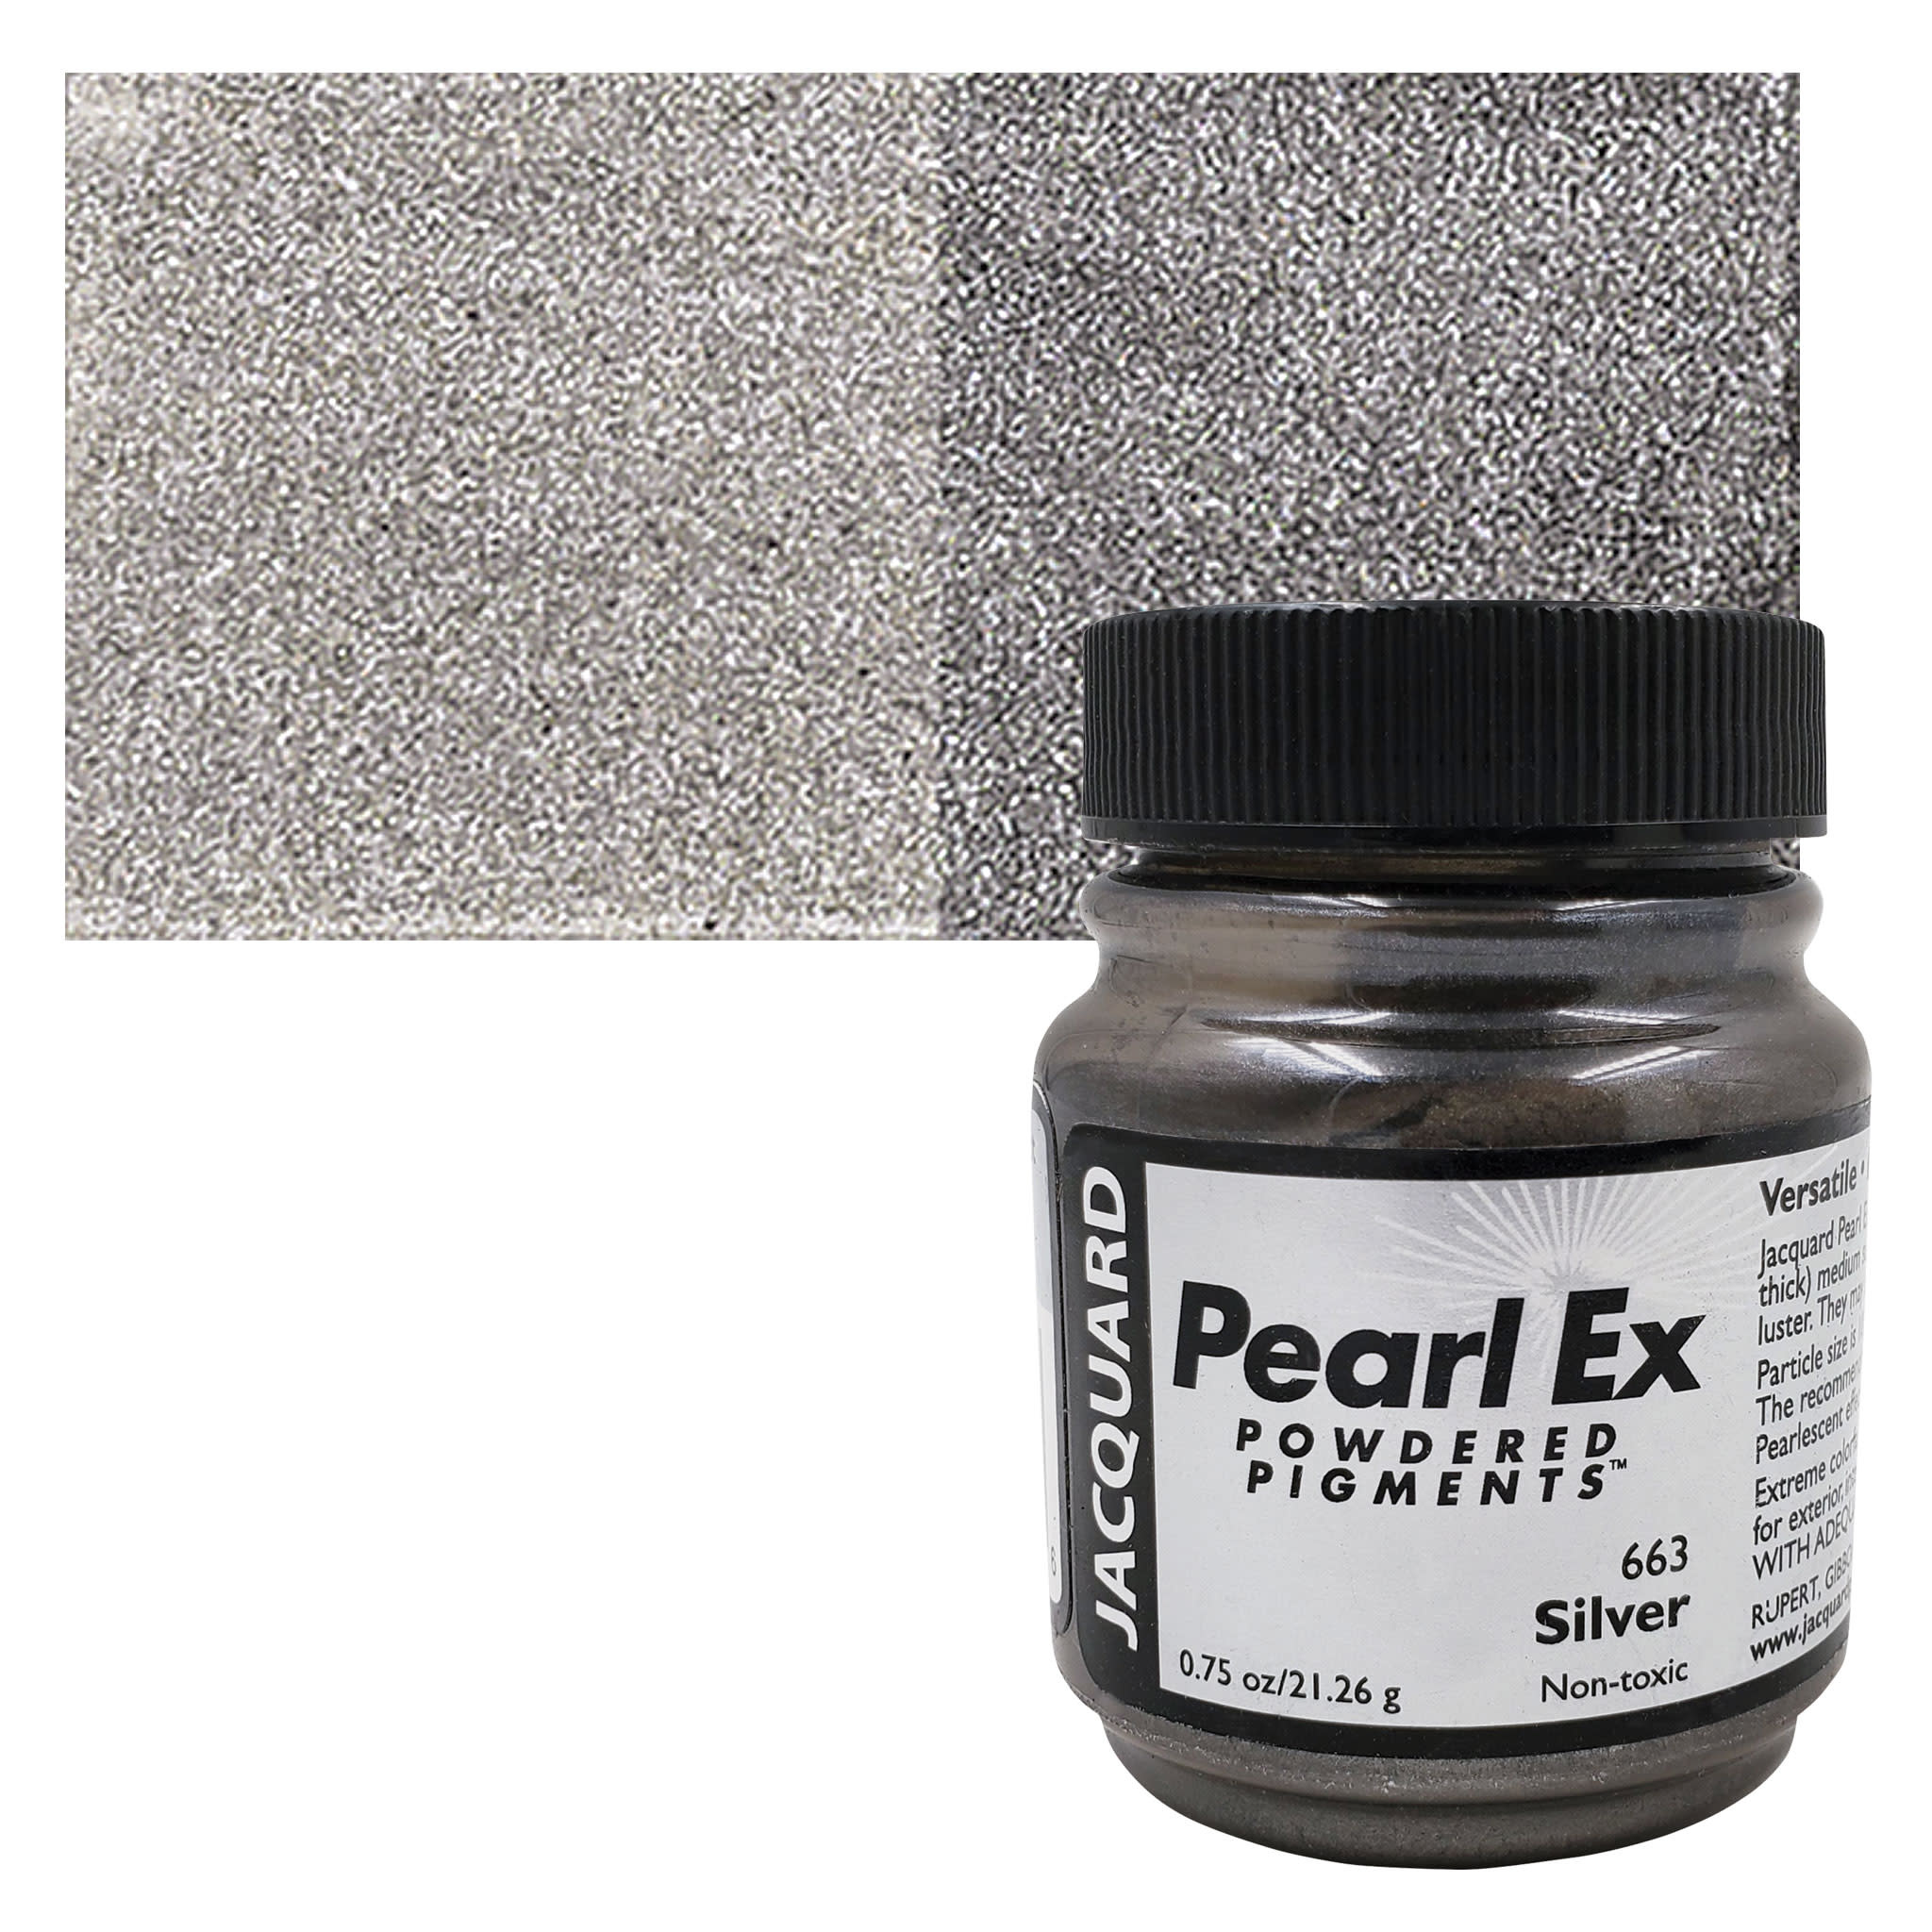 How to Make a Colorized Epoxy Clay and Jacquard Pearl Ex Powdered